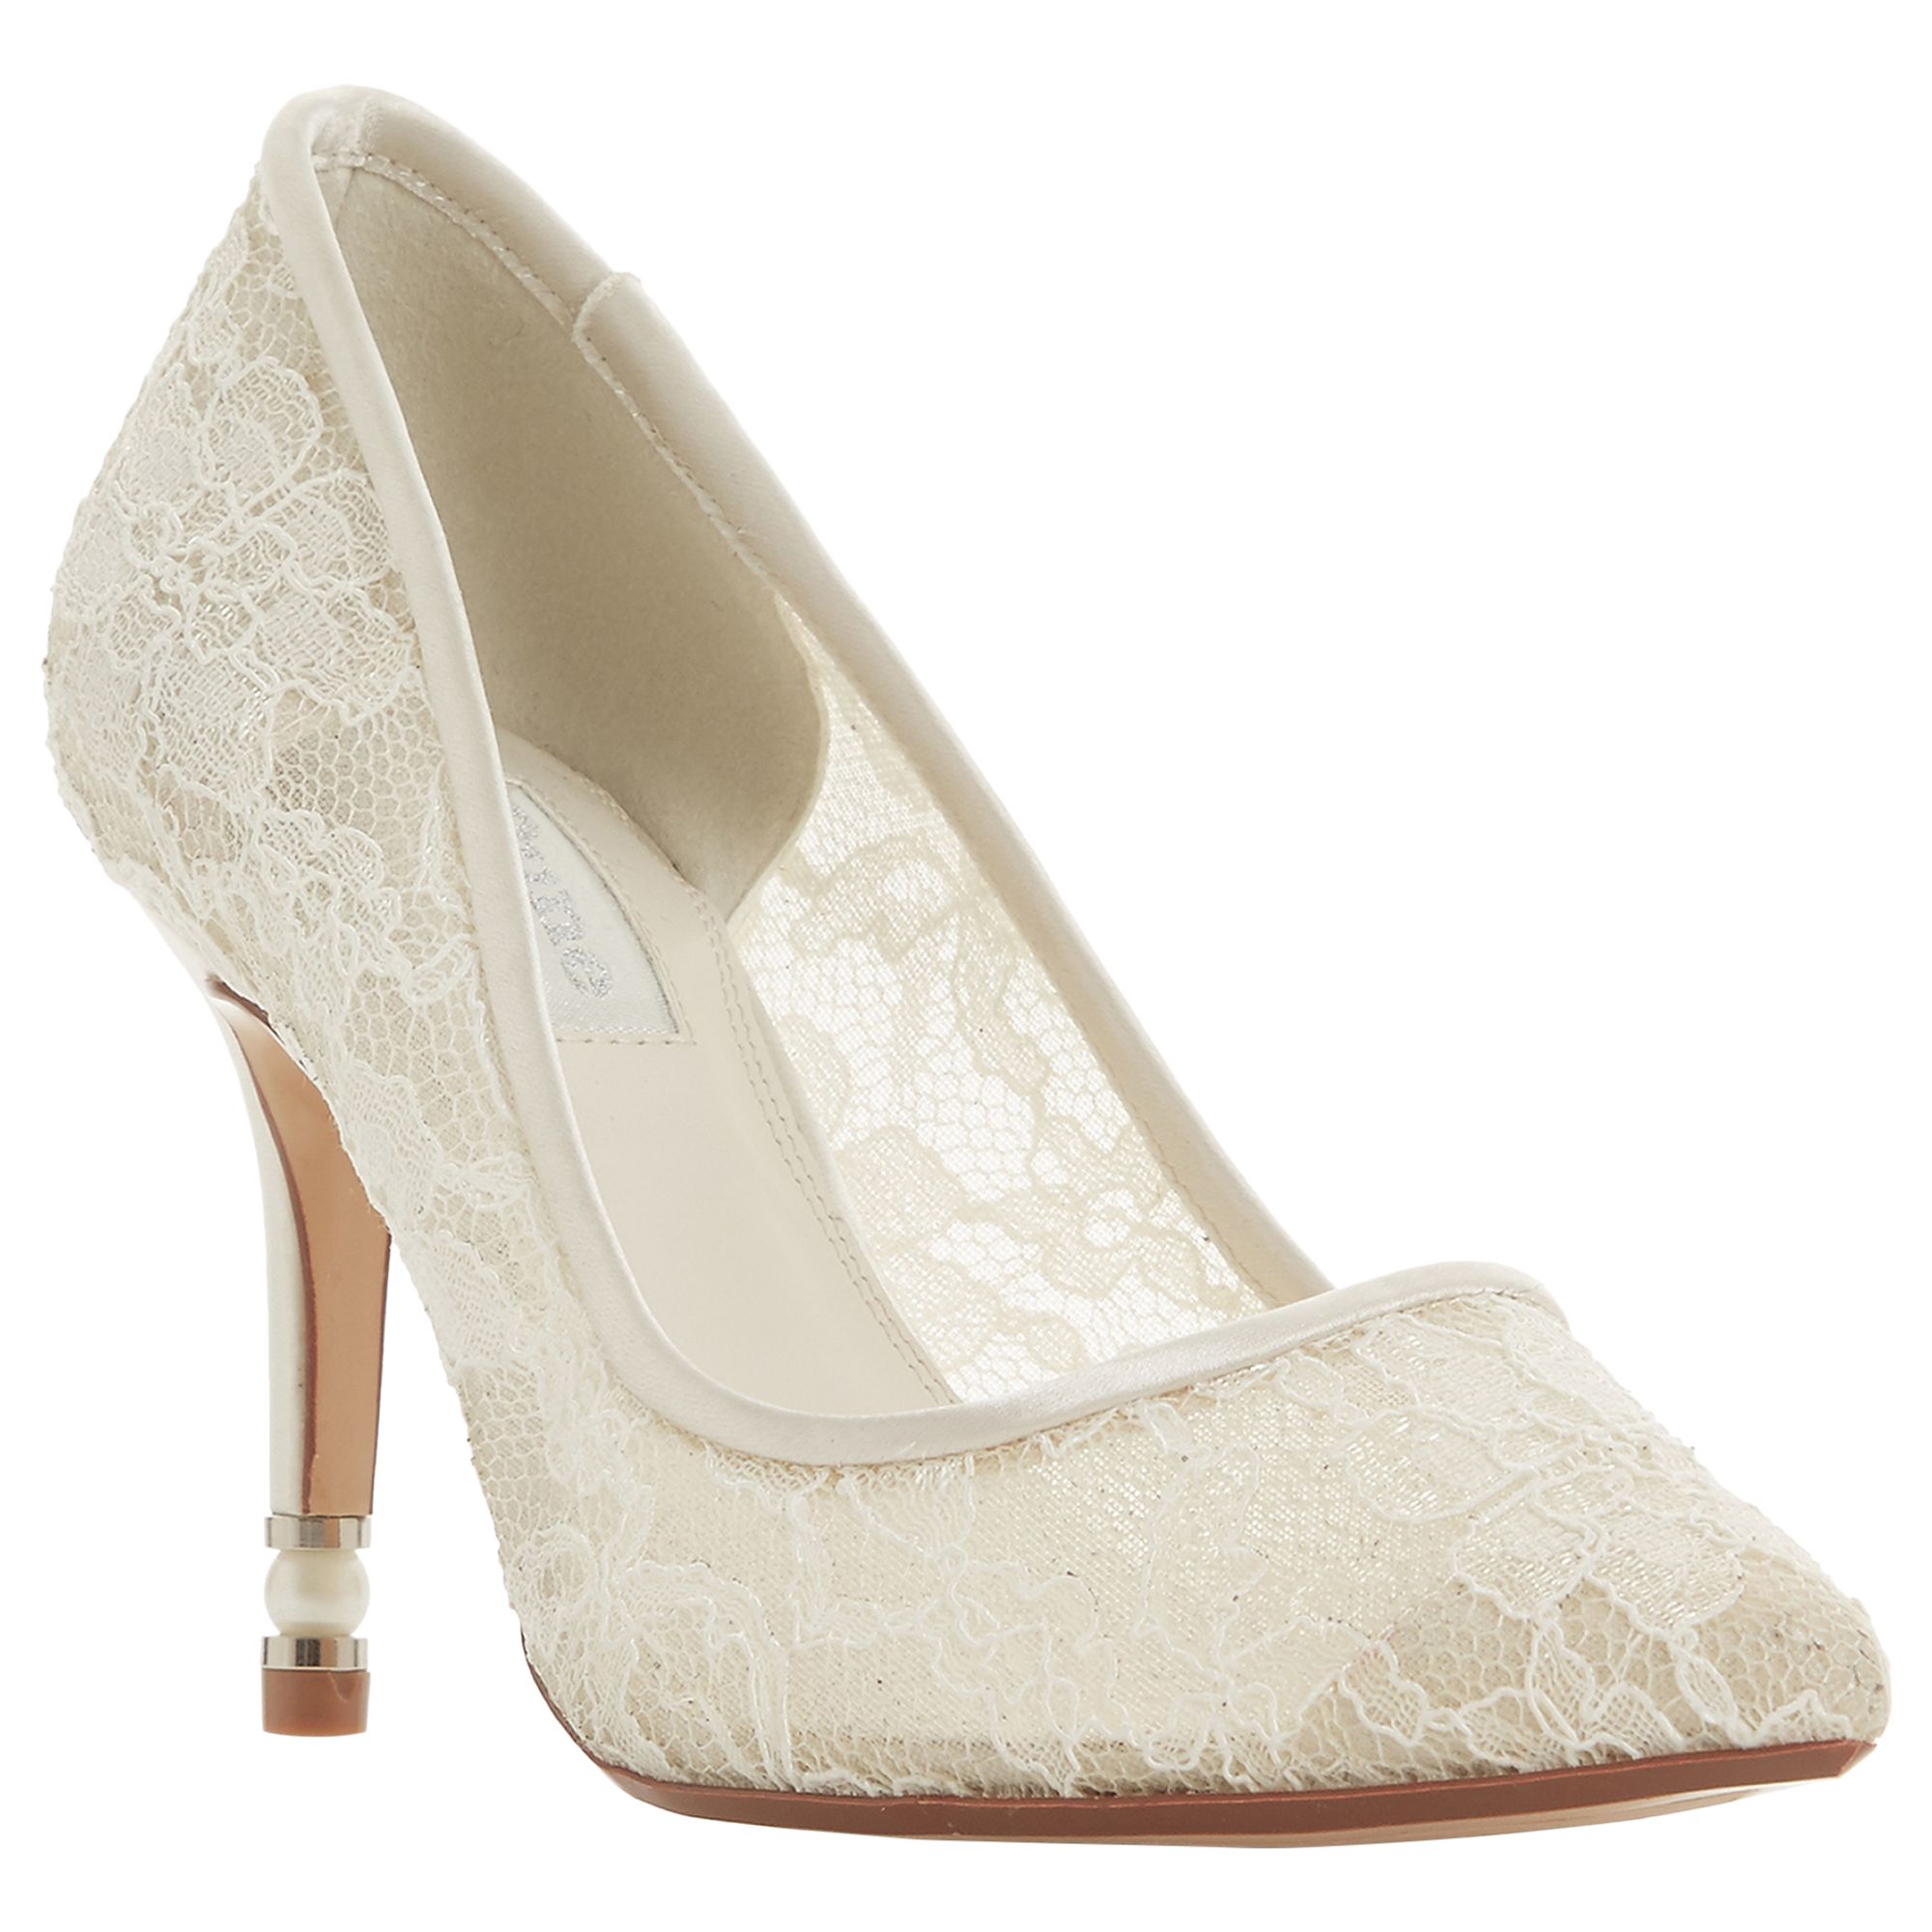 Dune Bridal Collection Aisle Faux Pearl Heel Court Shoes, Ivory, 3